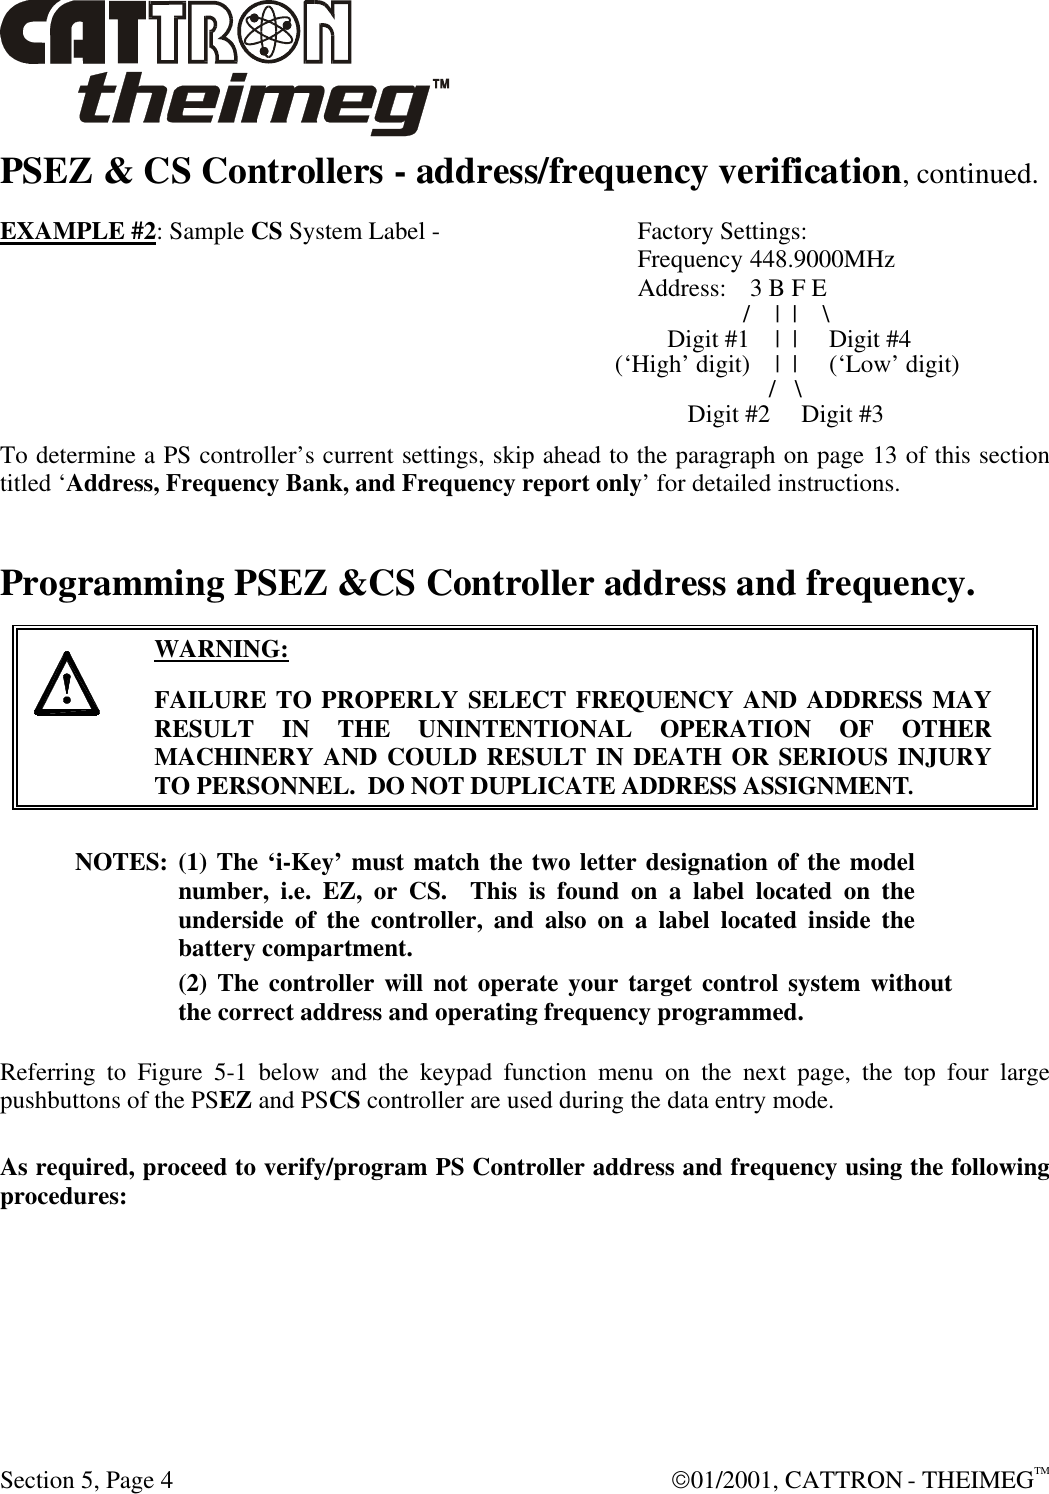  Section 5, Page 4  01/2001, CATTRON - THEIMEGTM PSEZ &amp; CS Controllers - address/frequency verification, continued. EXAMPLE #2: Sample CS System Label -  Factory Settings:  Frequency 448.9000MHz  Address: 3 B F E  /  |  |    \  Digit #1  |  |     Digit #4                   (‘High’ digit)   |  |     (‘Low’ digit)    /   \                                                                                                               Digit #2     Digit #3 To determine a PS controller’s current settings, skip ahead to the paragraph on page 13 of this section titled ‘Address, Frequency Bank, and Frequency report only’ for detailed instructions. Programming PSEZ &amp;CS Controller address and frequency.      WARNING: FAILURE TO PROPERLY SELECT FREQUENCY AND ADDRESS MAY RESULT IN THE UNINTENTIONAL OPERATION OF OTHER MACHINERY AND COULD RESULT IN DEATH OR SERIOUS INJURY TO PERSONNEL.  DO NOT DUPLICATE ADDRESS ASSIGNMENT. NOTES: (1) The ‘i-Key’ must match the two letter designation of the model number, i.e. EZ, or CS.  This is found on a label located on the underside of the controller, and also on a label located inside the battery compartment. (2) The controller will not operate your target control system without the correct address and operating frequency programmed.  Referring to Figure 5-1 below and the keypad function menu on the next page, the top four large pushbuttons of the PSEZ and PSCS controller are used during the data entry mode.   As required, proceed to verify/program PS Controller address and frequency using the following procedures:   